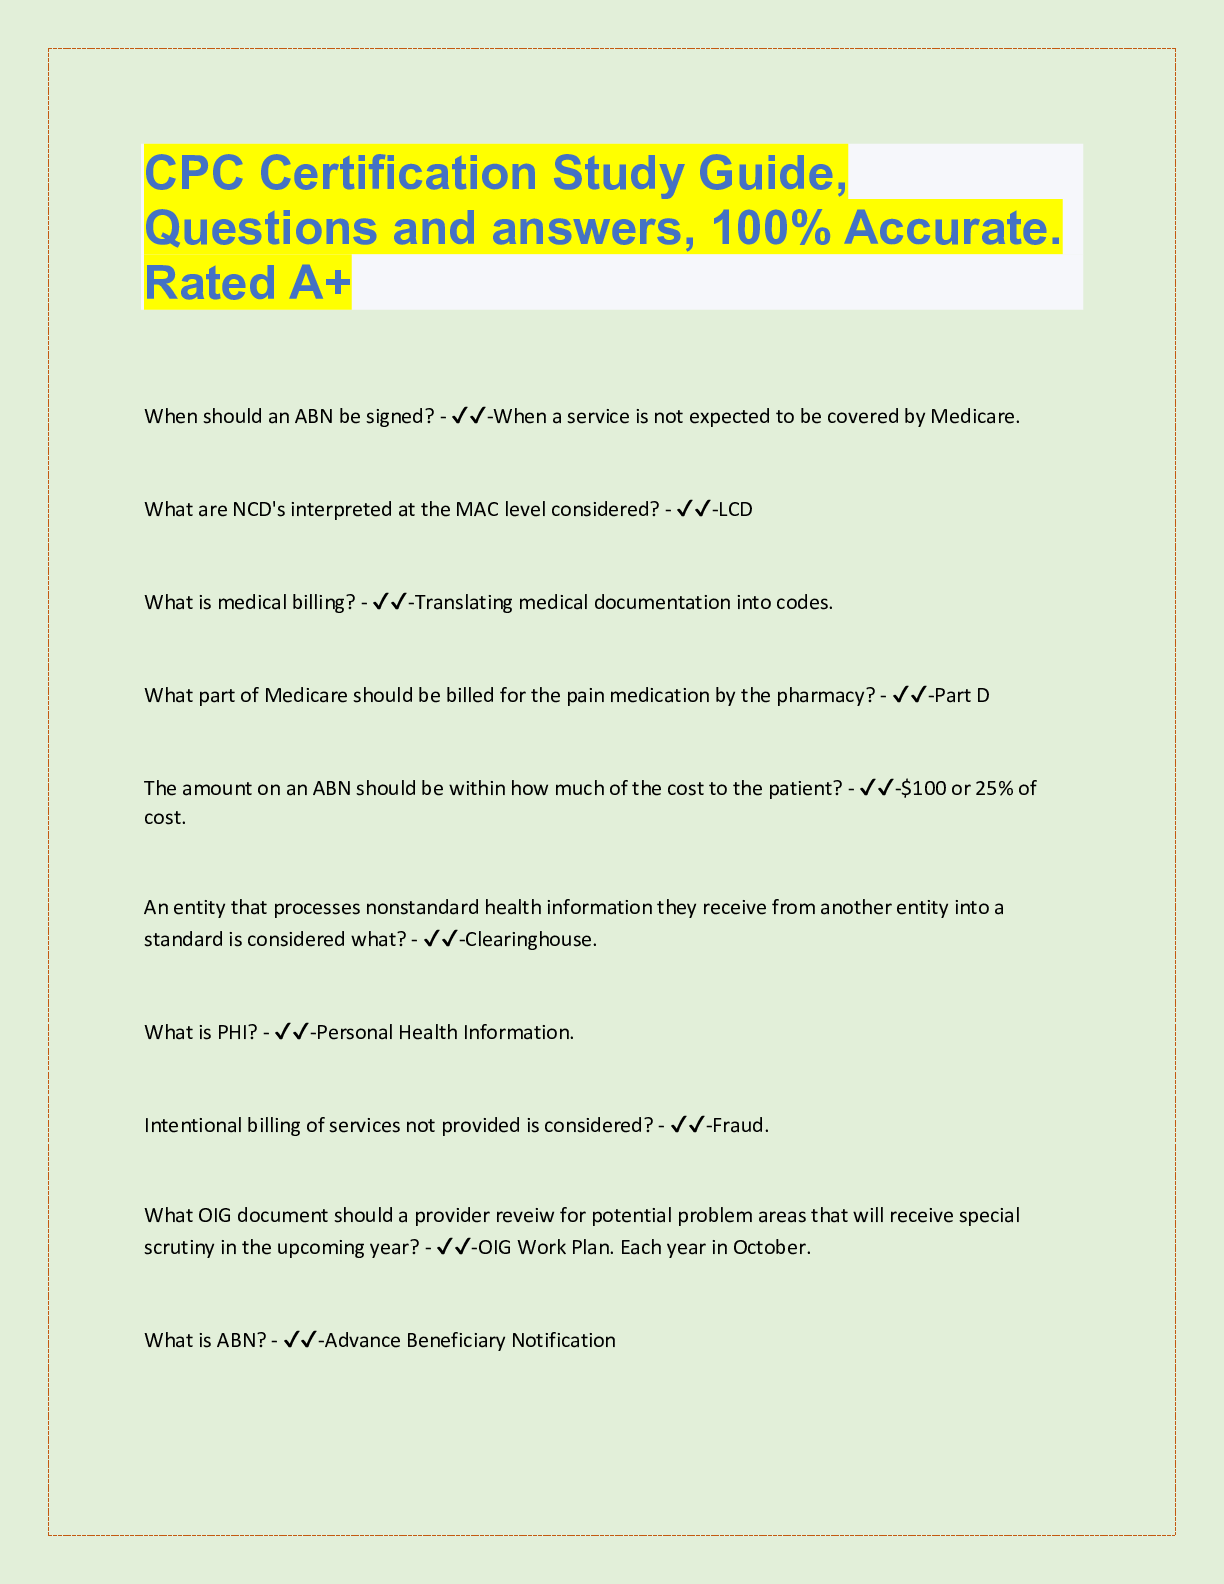 CPC Certification Study Guide Questions And Answers With Complete Top